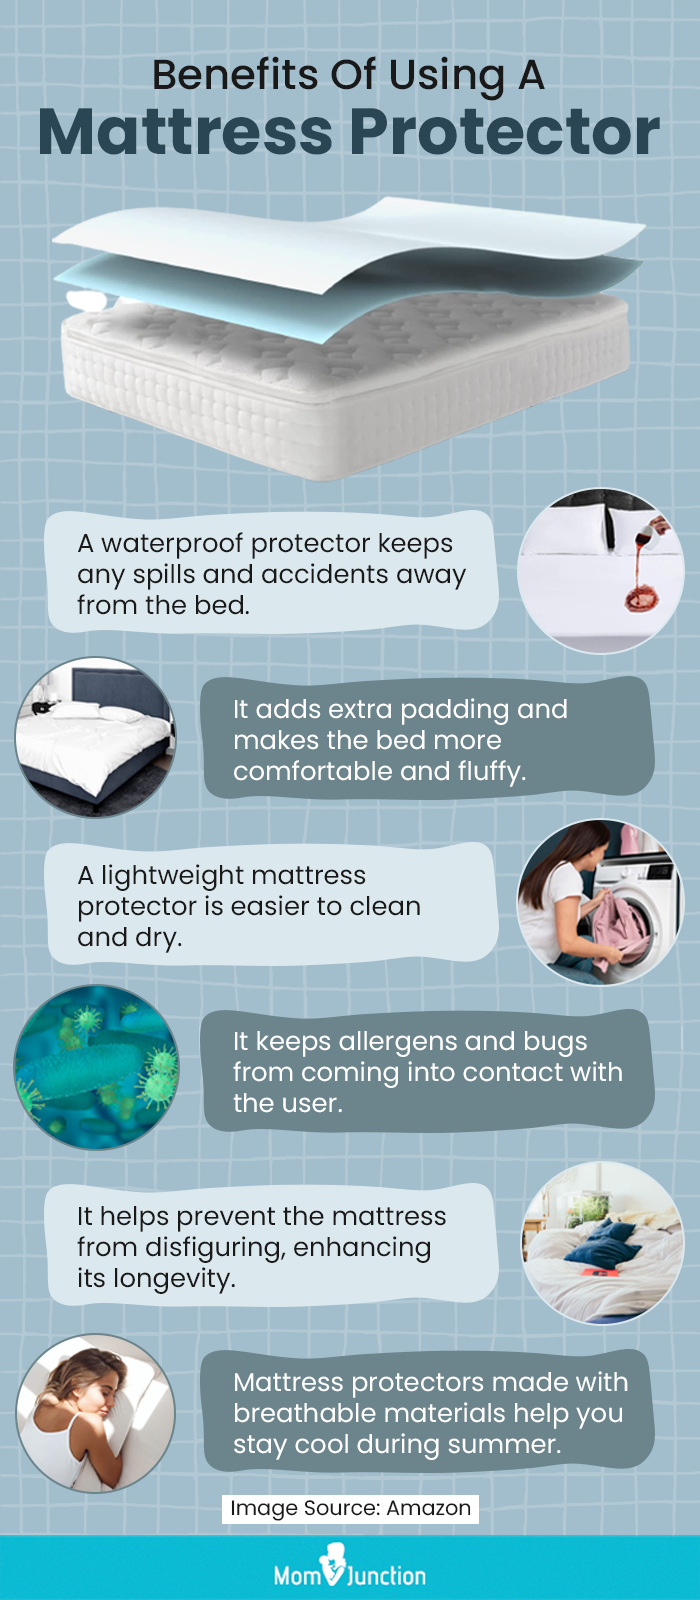 Benefits Of Using A Mattress Protector (infographic)